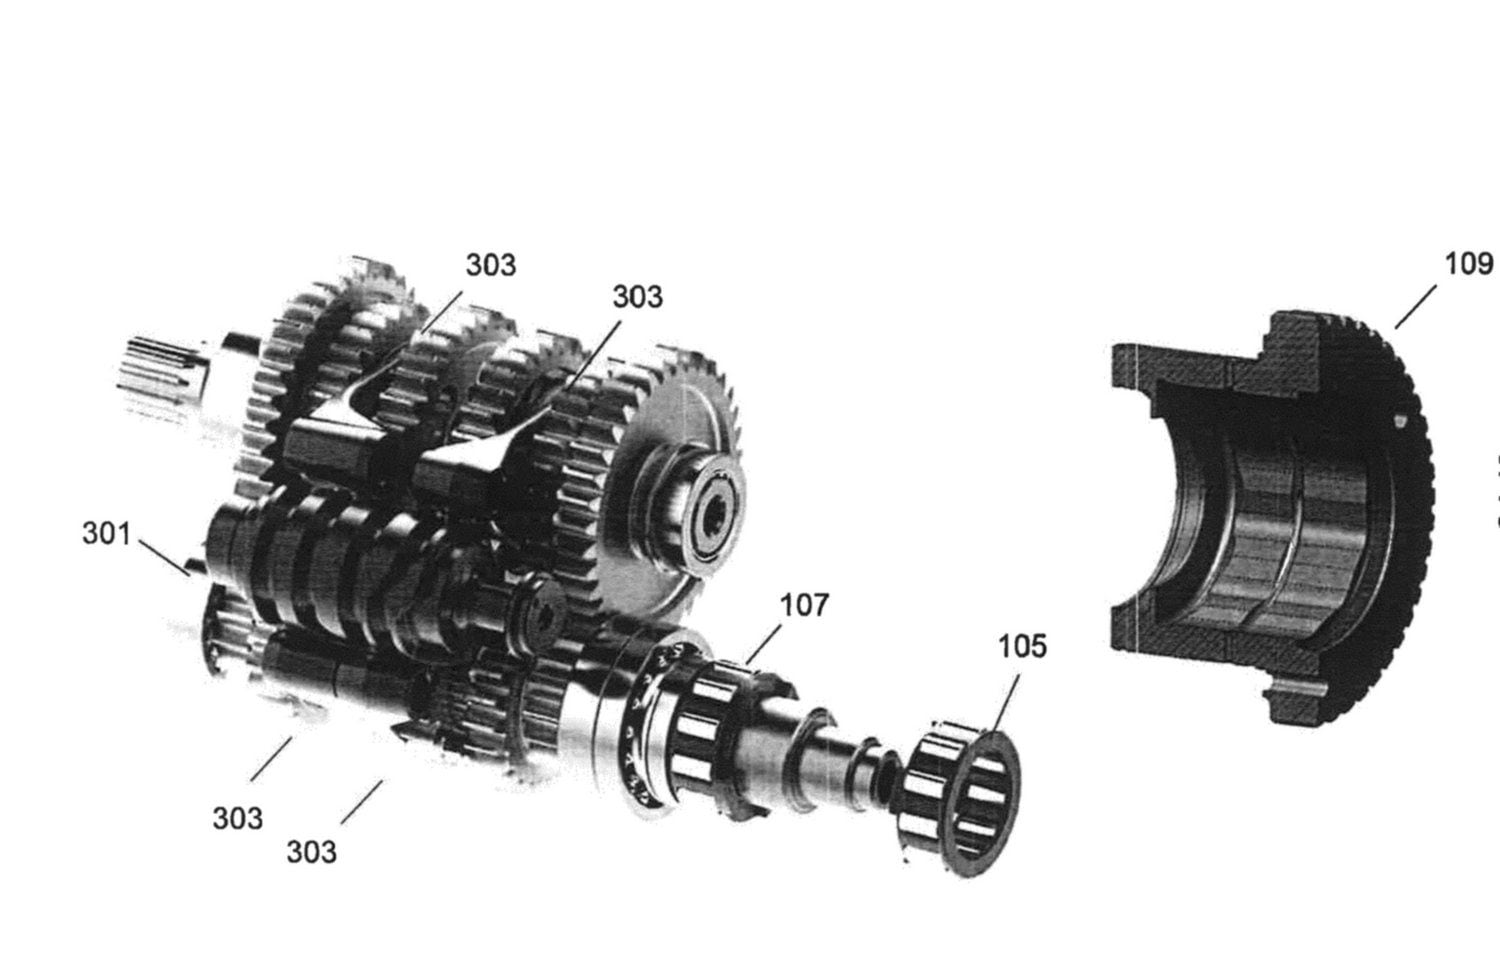 Ducati’s system uses a single clutch on an input hub that acts on two lockable bearings, one on each shaft.